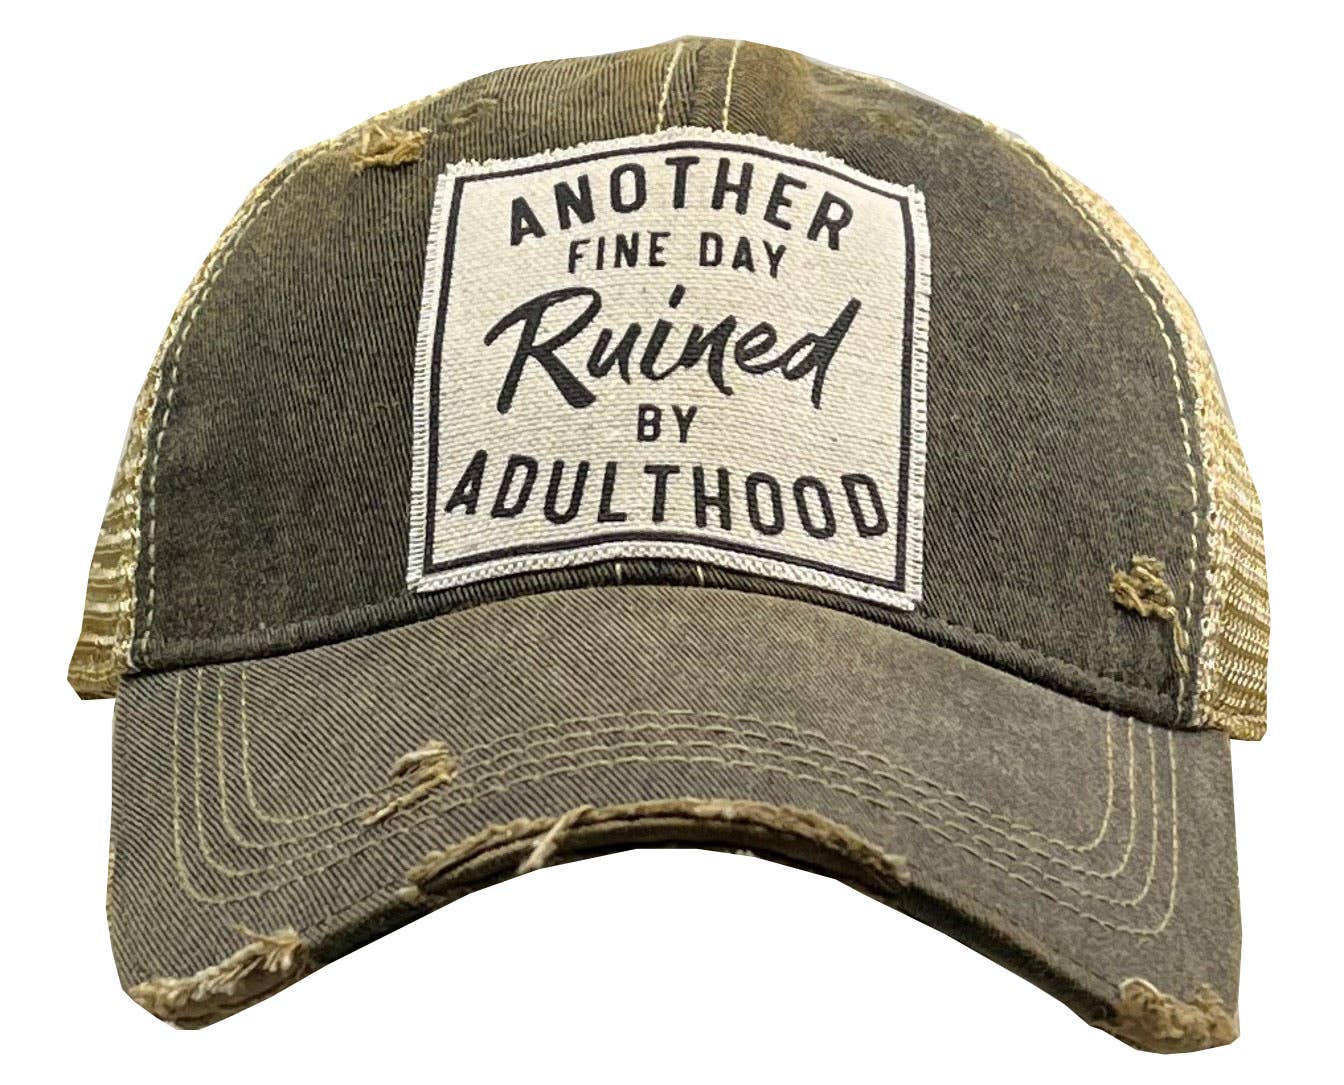 Another Fine Day Ruined By Adulthood Trucker Baseball Cap